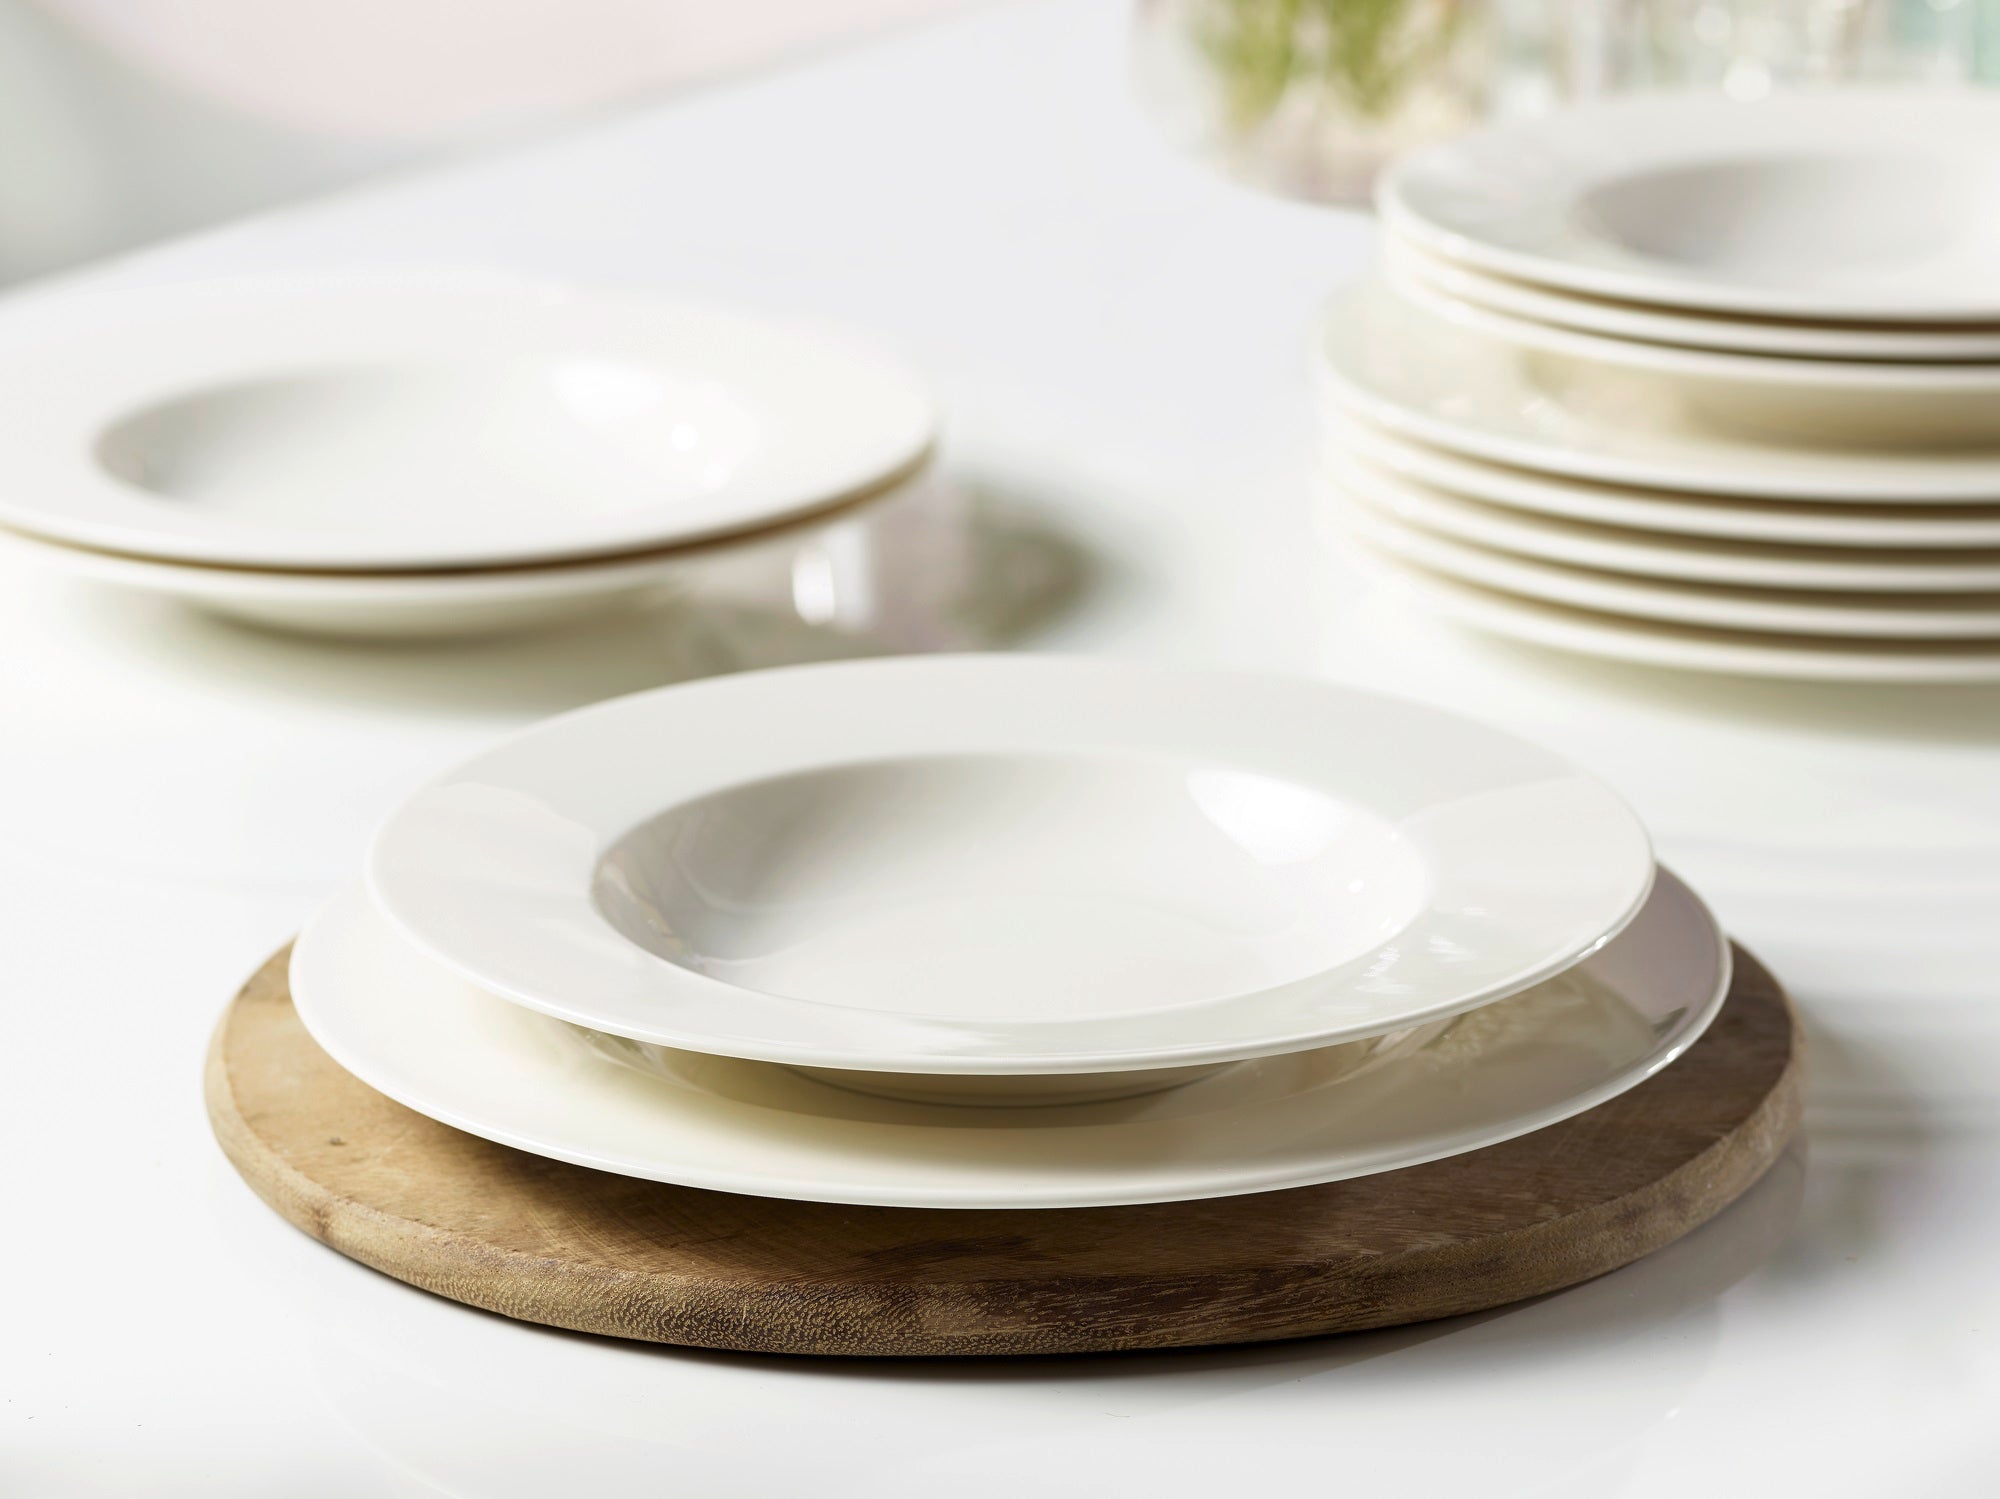 Likes. By Villeroy &amp; Boch Basic White 12-piece set for 4 people, consisting of: 4 dinner plates, 4 soup plates, 4 dessert plates